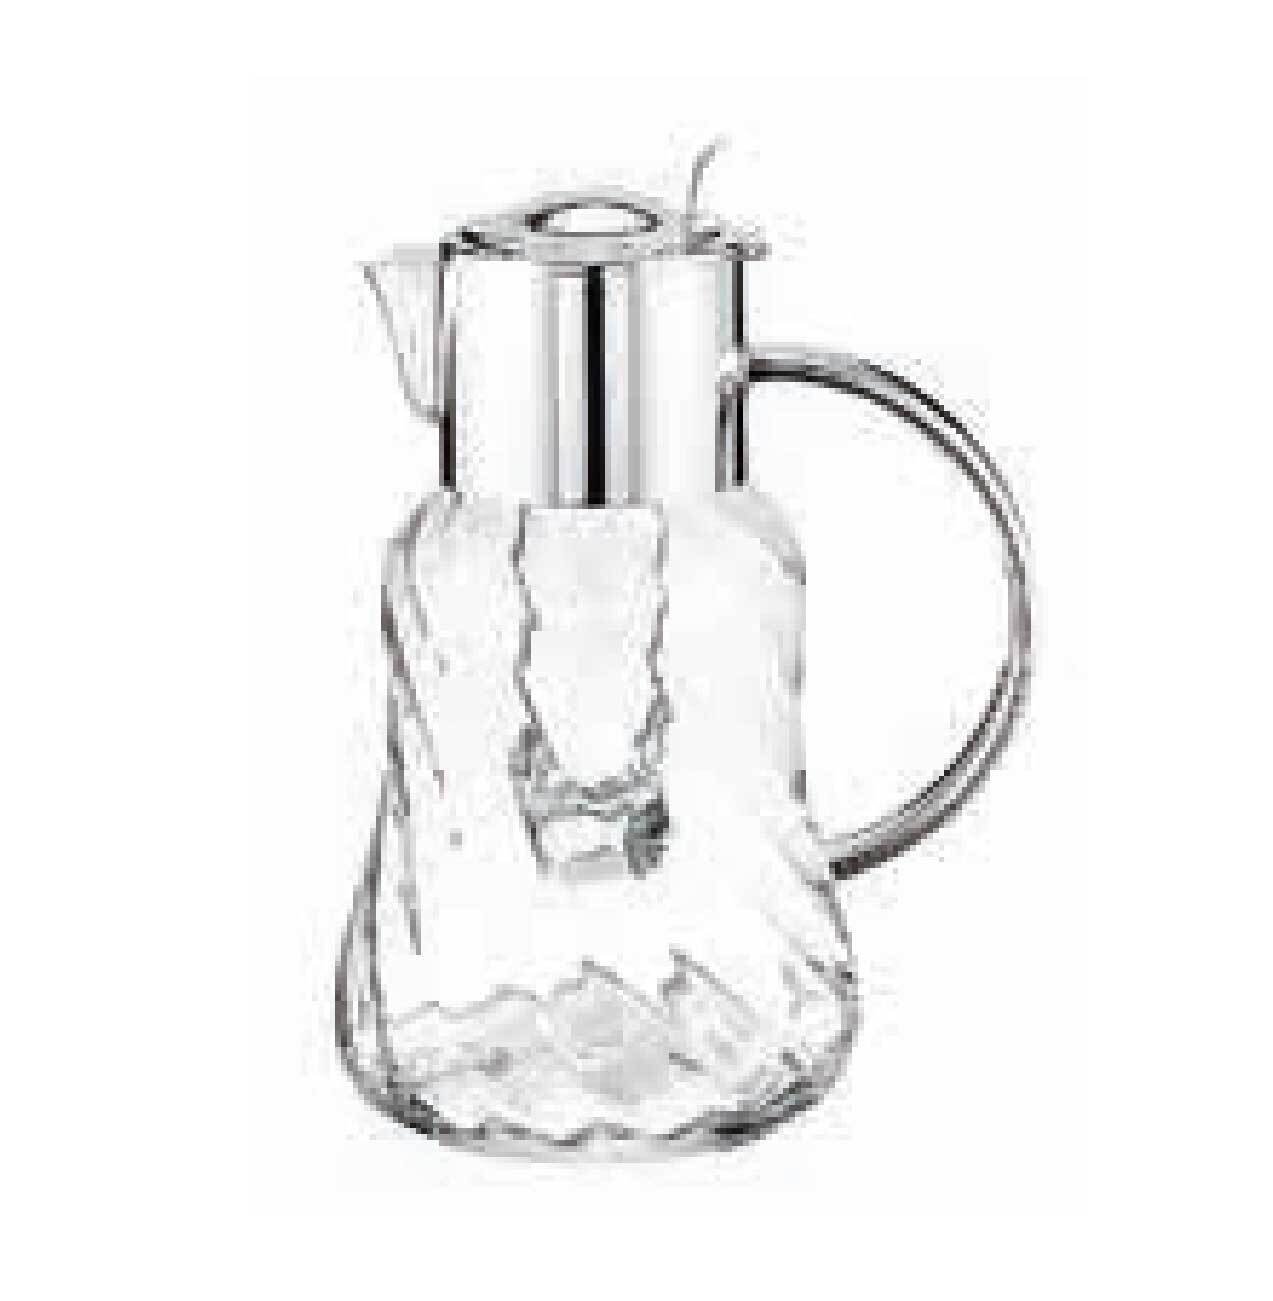 Ercuis Tuileries Ice Fruit Juice Jug 11.75 Inch Silver Plated F550090-04